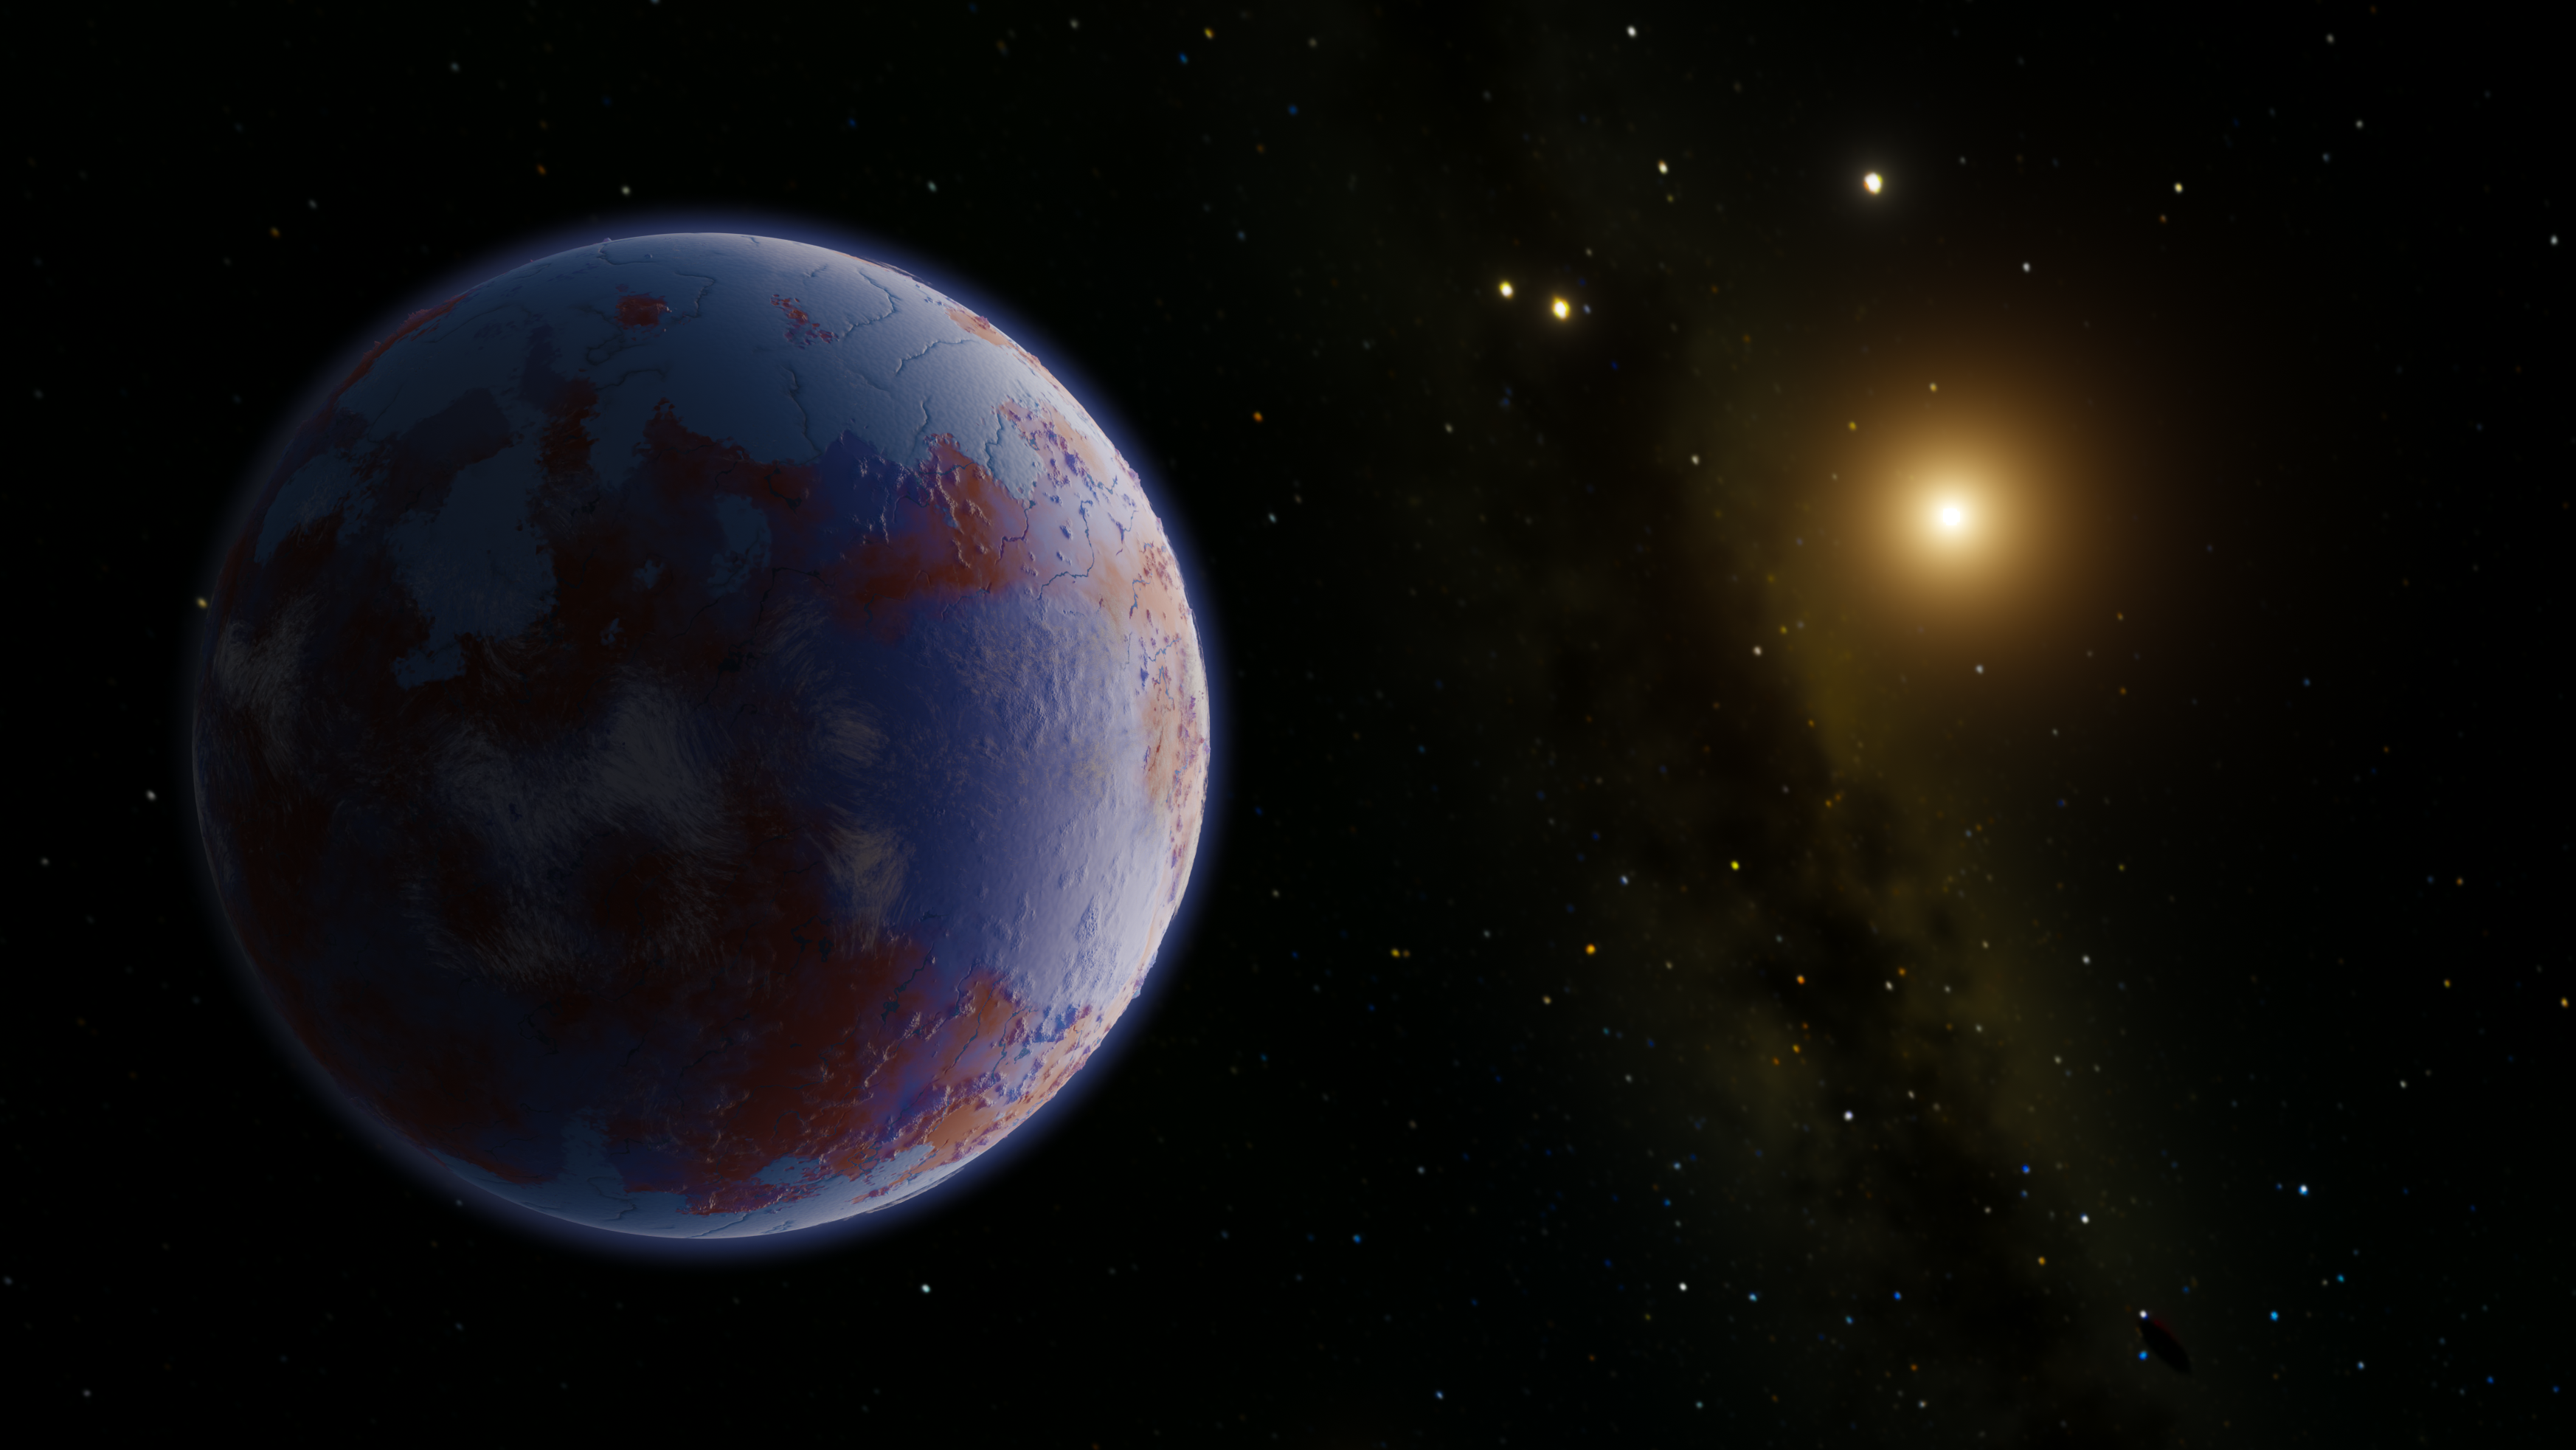 An Earth-like planet in the far reaches of the solar system